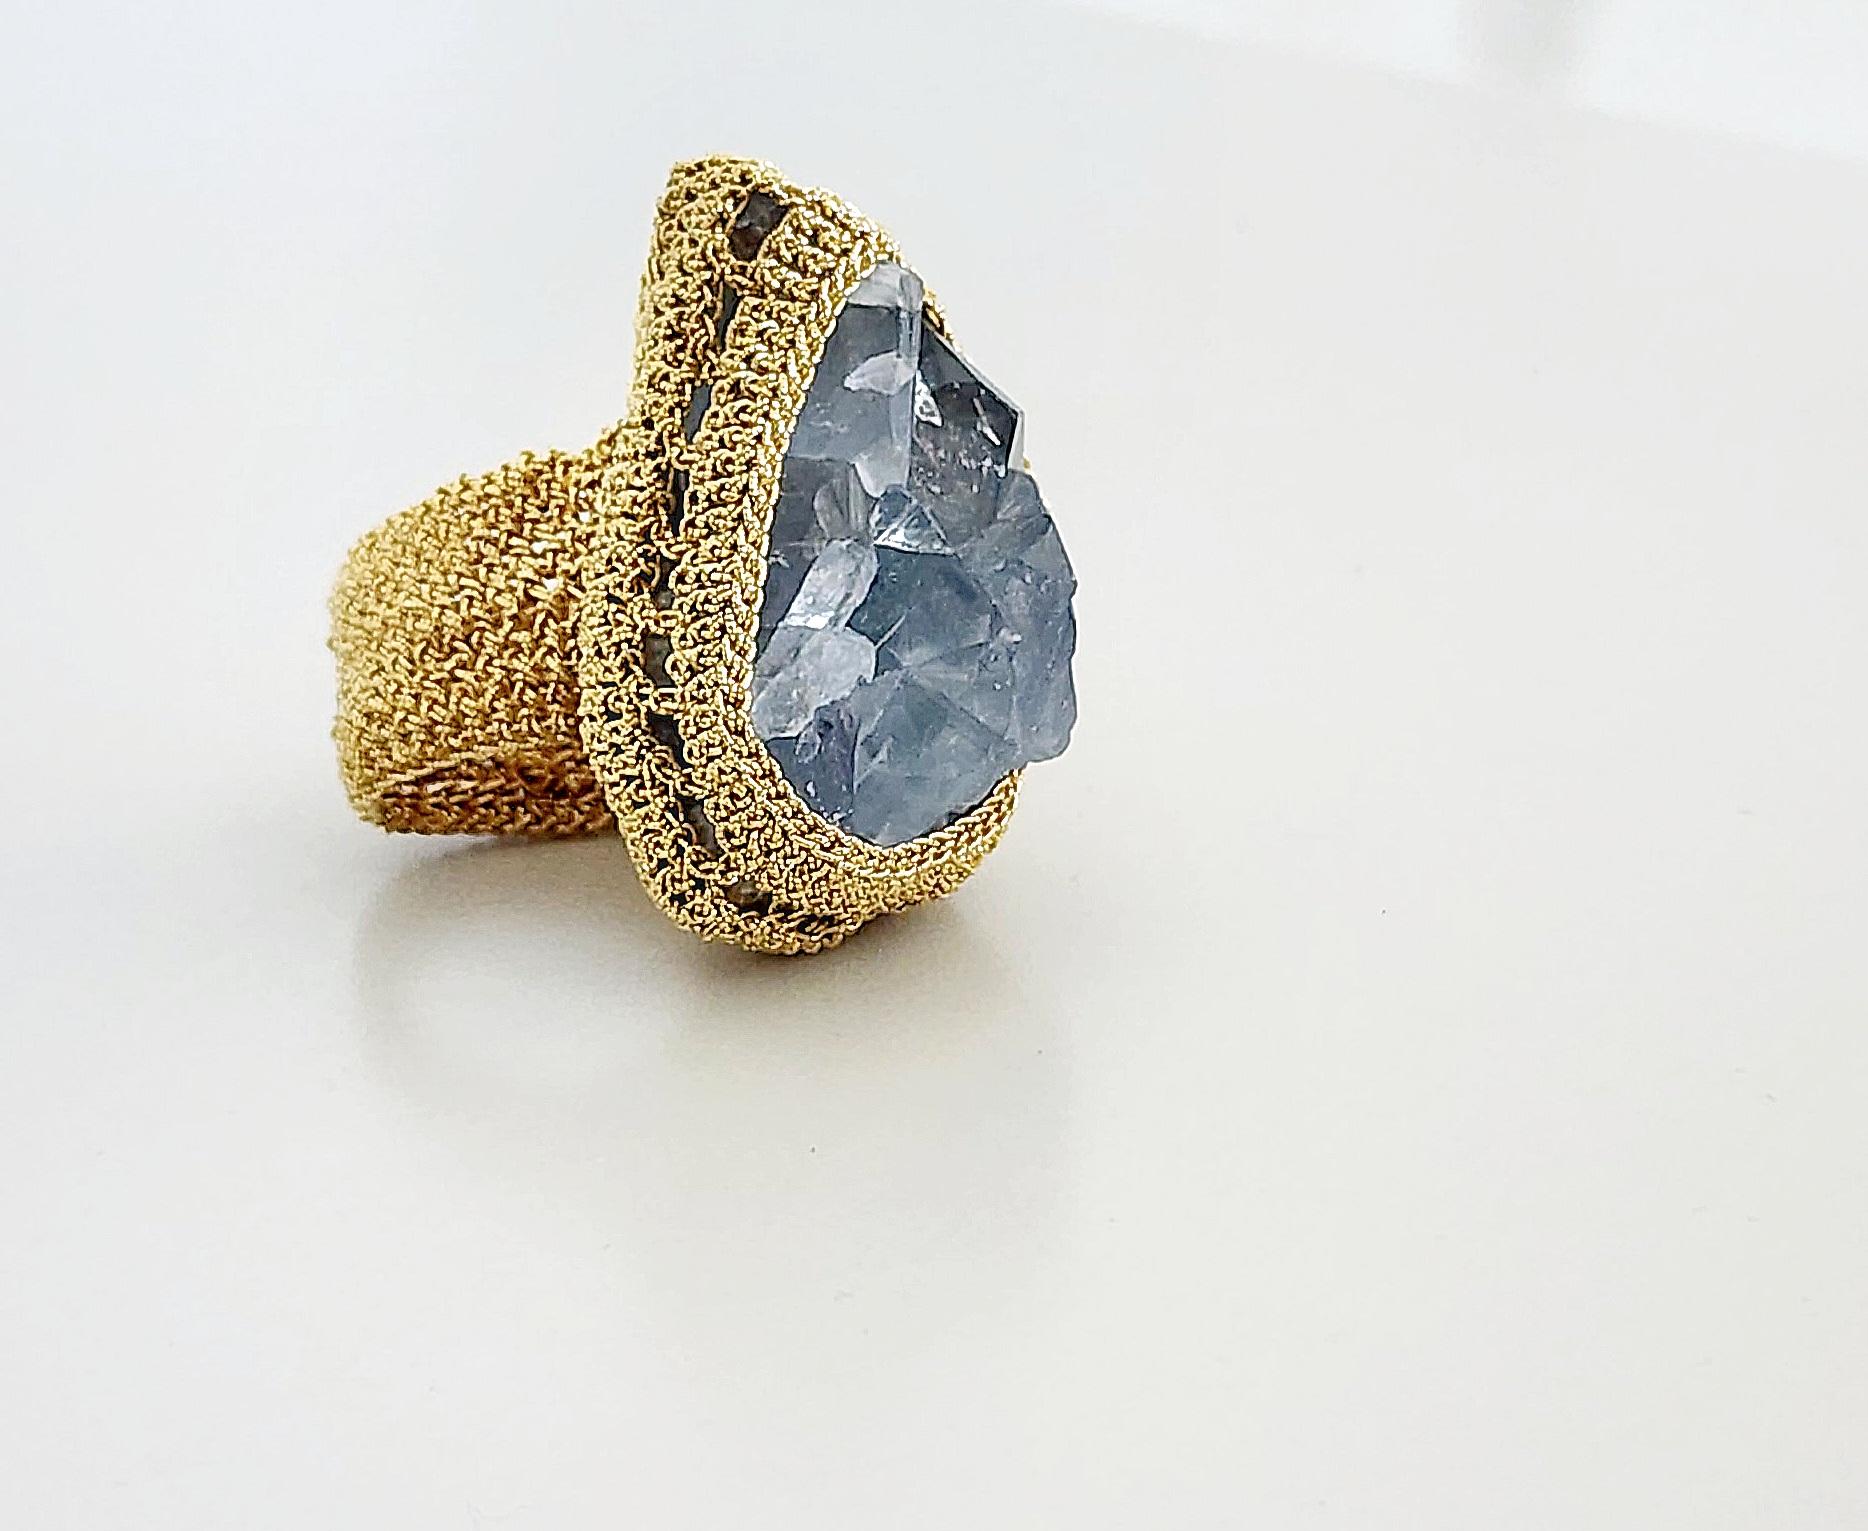 One of a kind, beautiful statement ring. This ring is crochet with an 18 Karat gold thread. The stone is a large rough cut Celestite. This stone is believed to promote communication with the angelic realms. The thread is made from an 18 karat gold